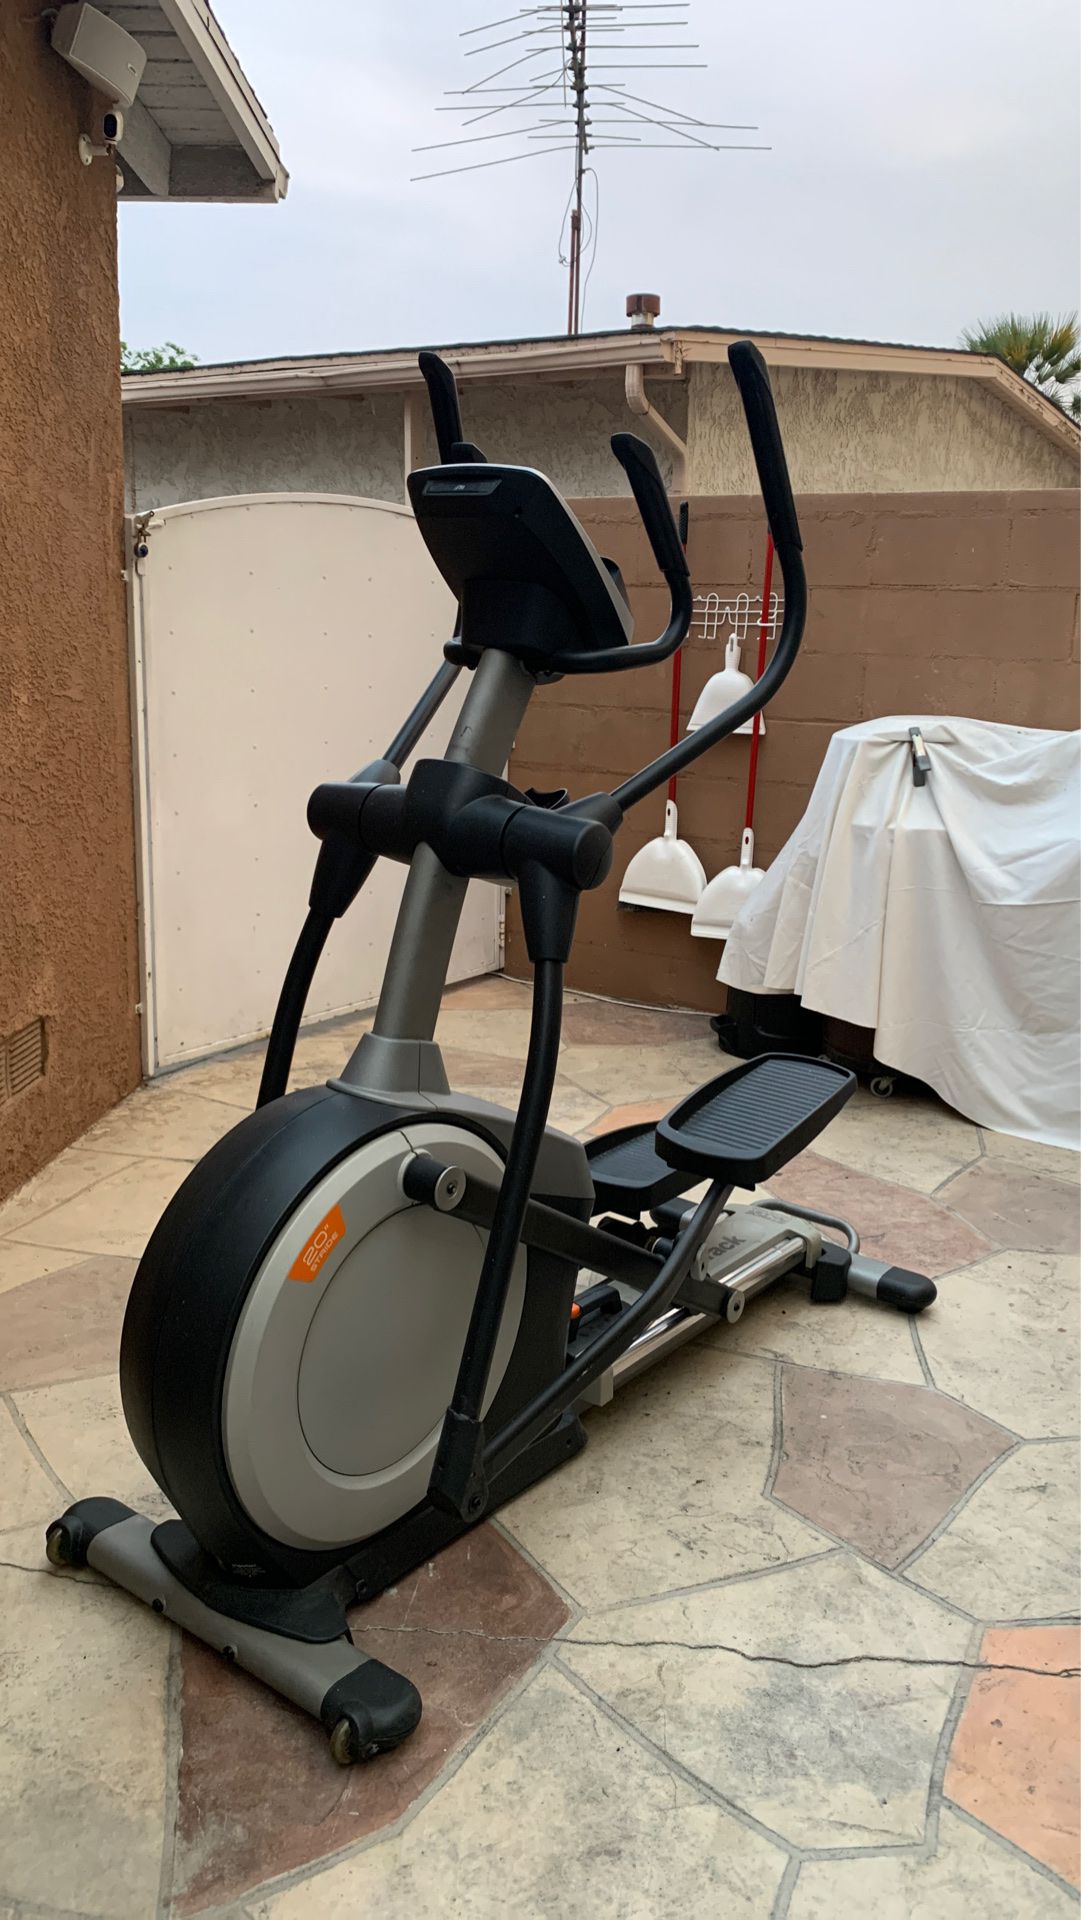 NordicTrack E5.7 Elliptical with Adjustable Stride and Incline Ramp